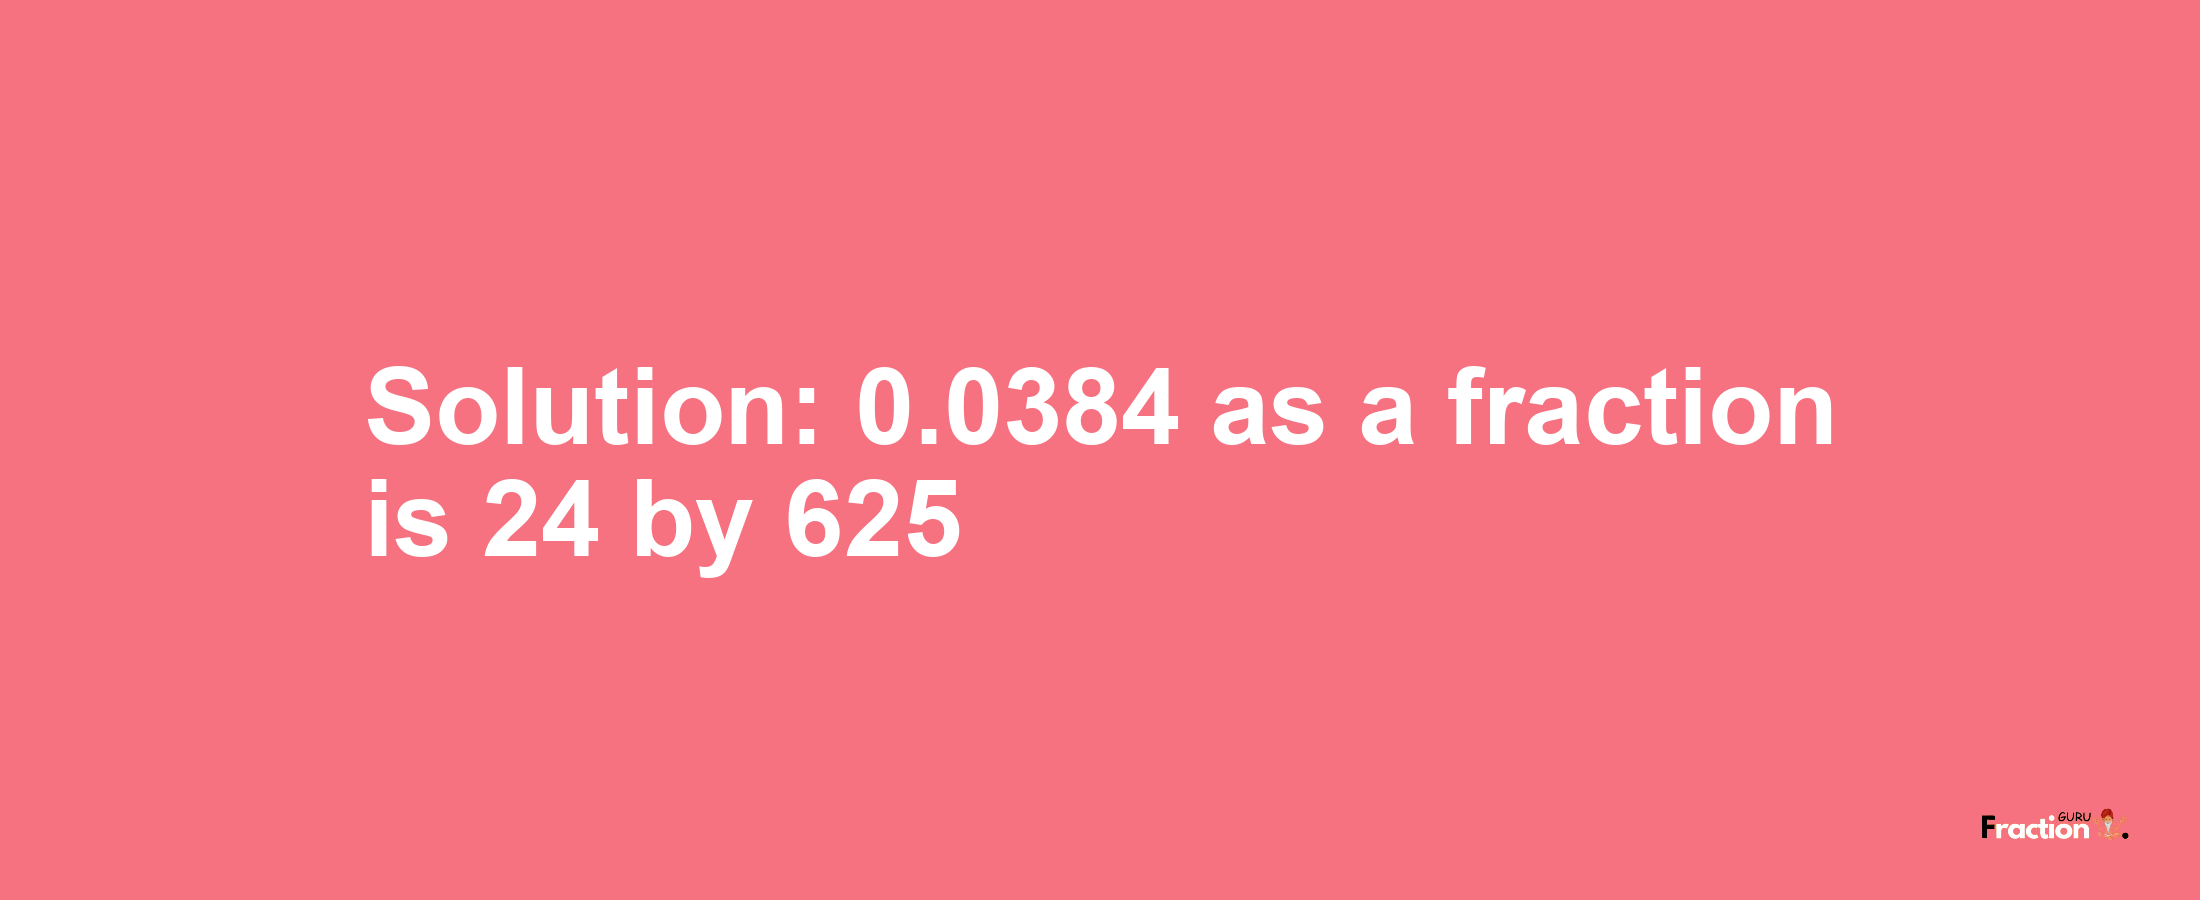 Solution:0.0384 as a fraction is 24/625